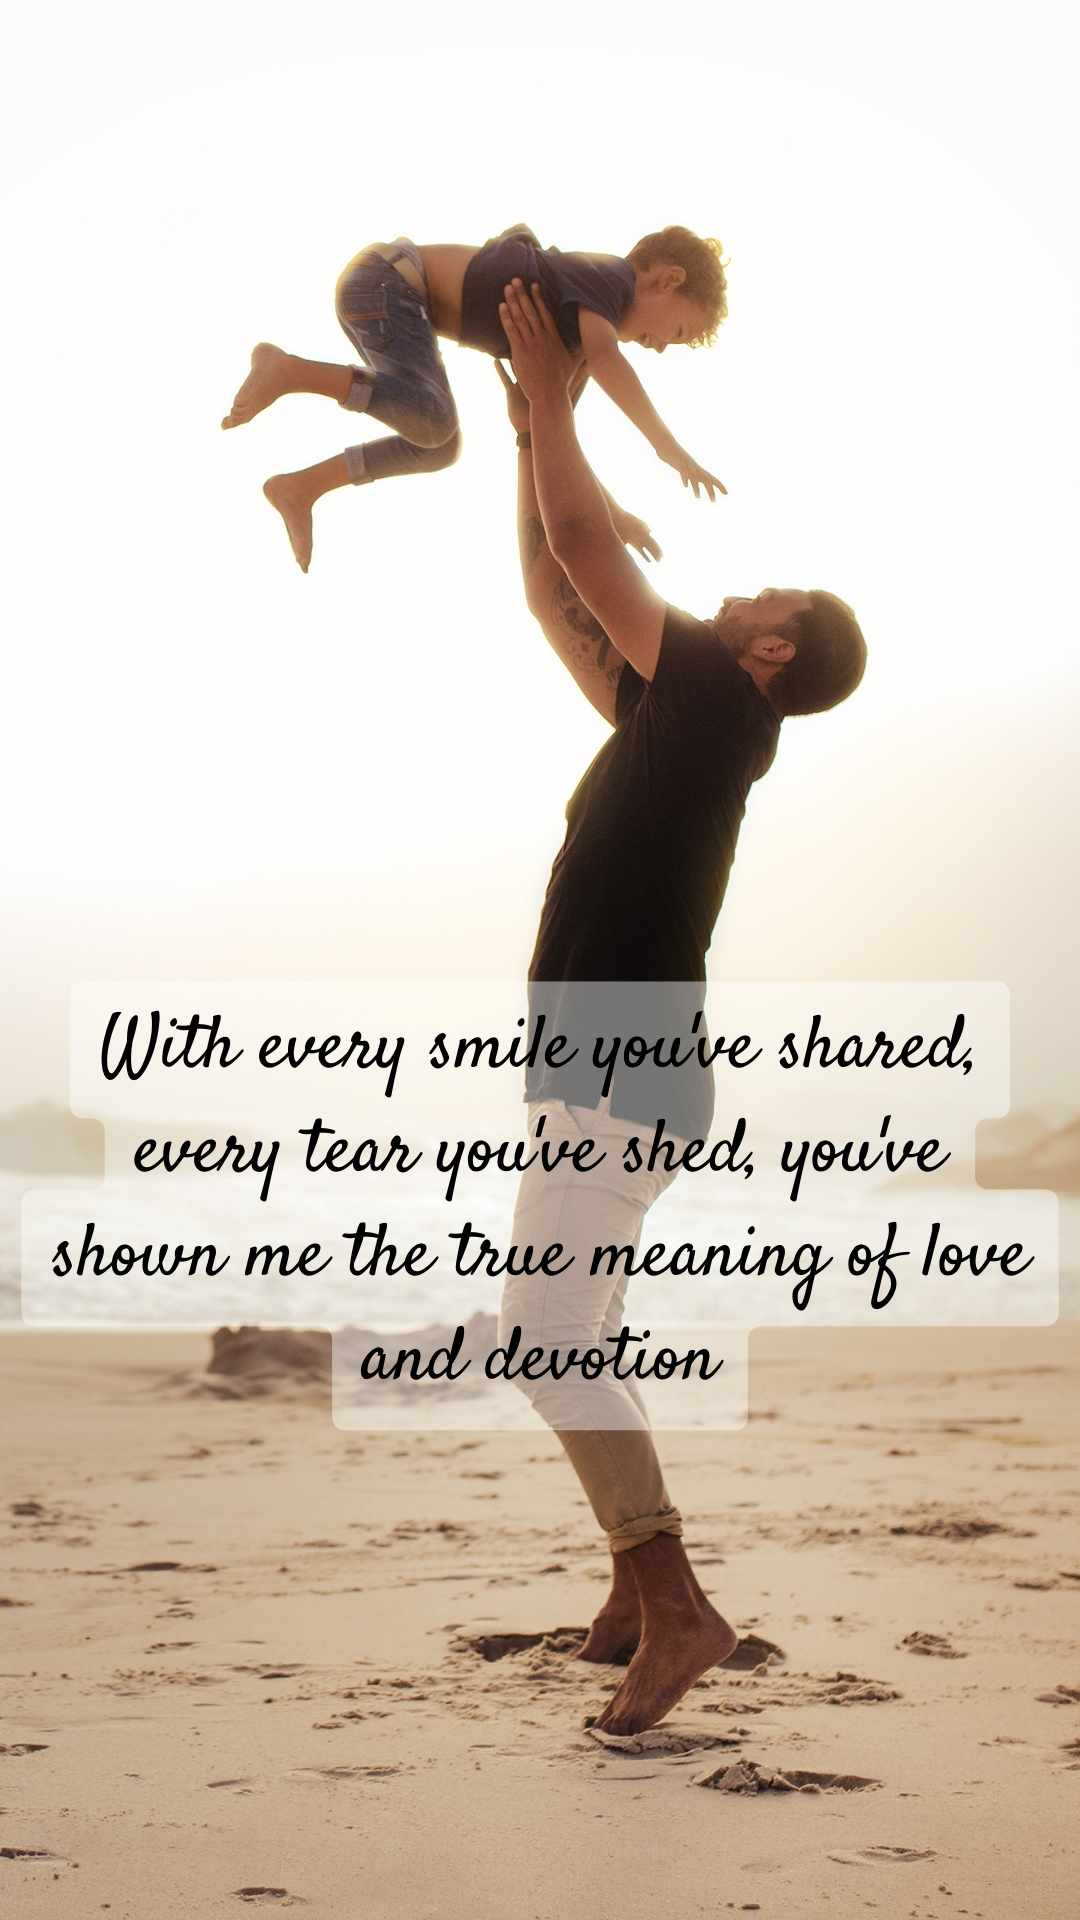 Quote: 'With every smile you've shared, every tear you've shed, you've shown me the true meaning of love and devotion.'